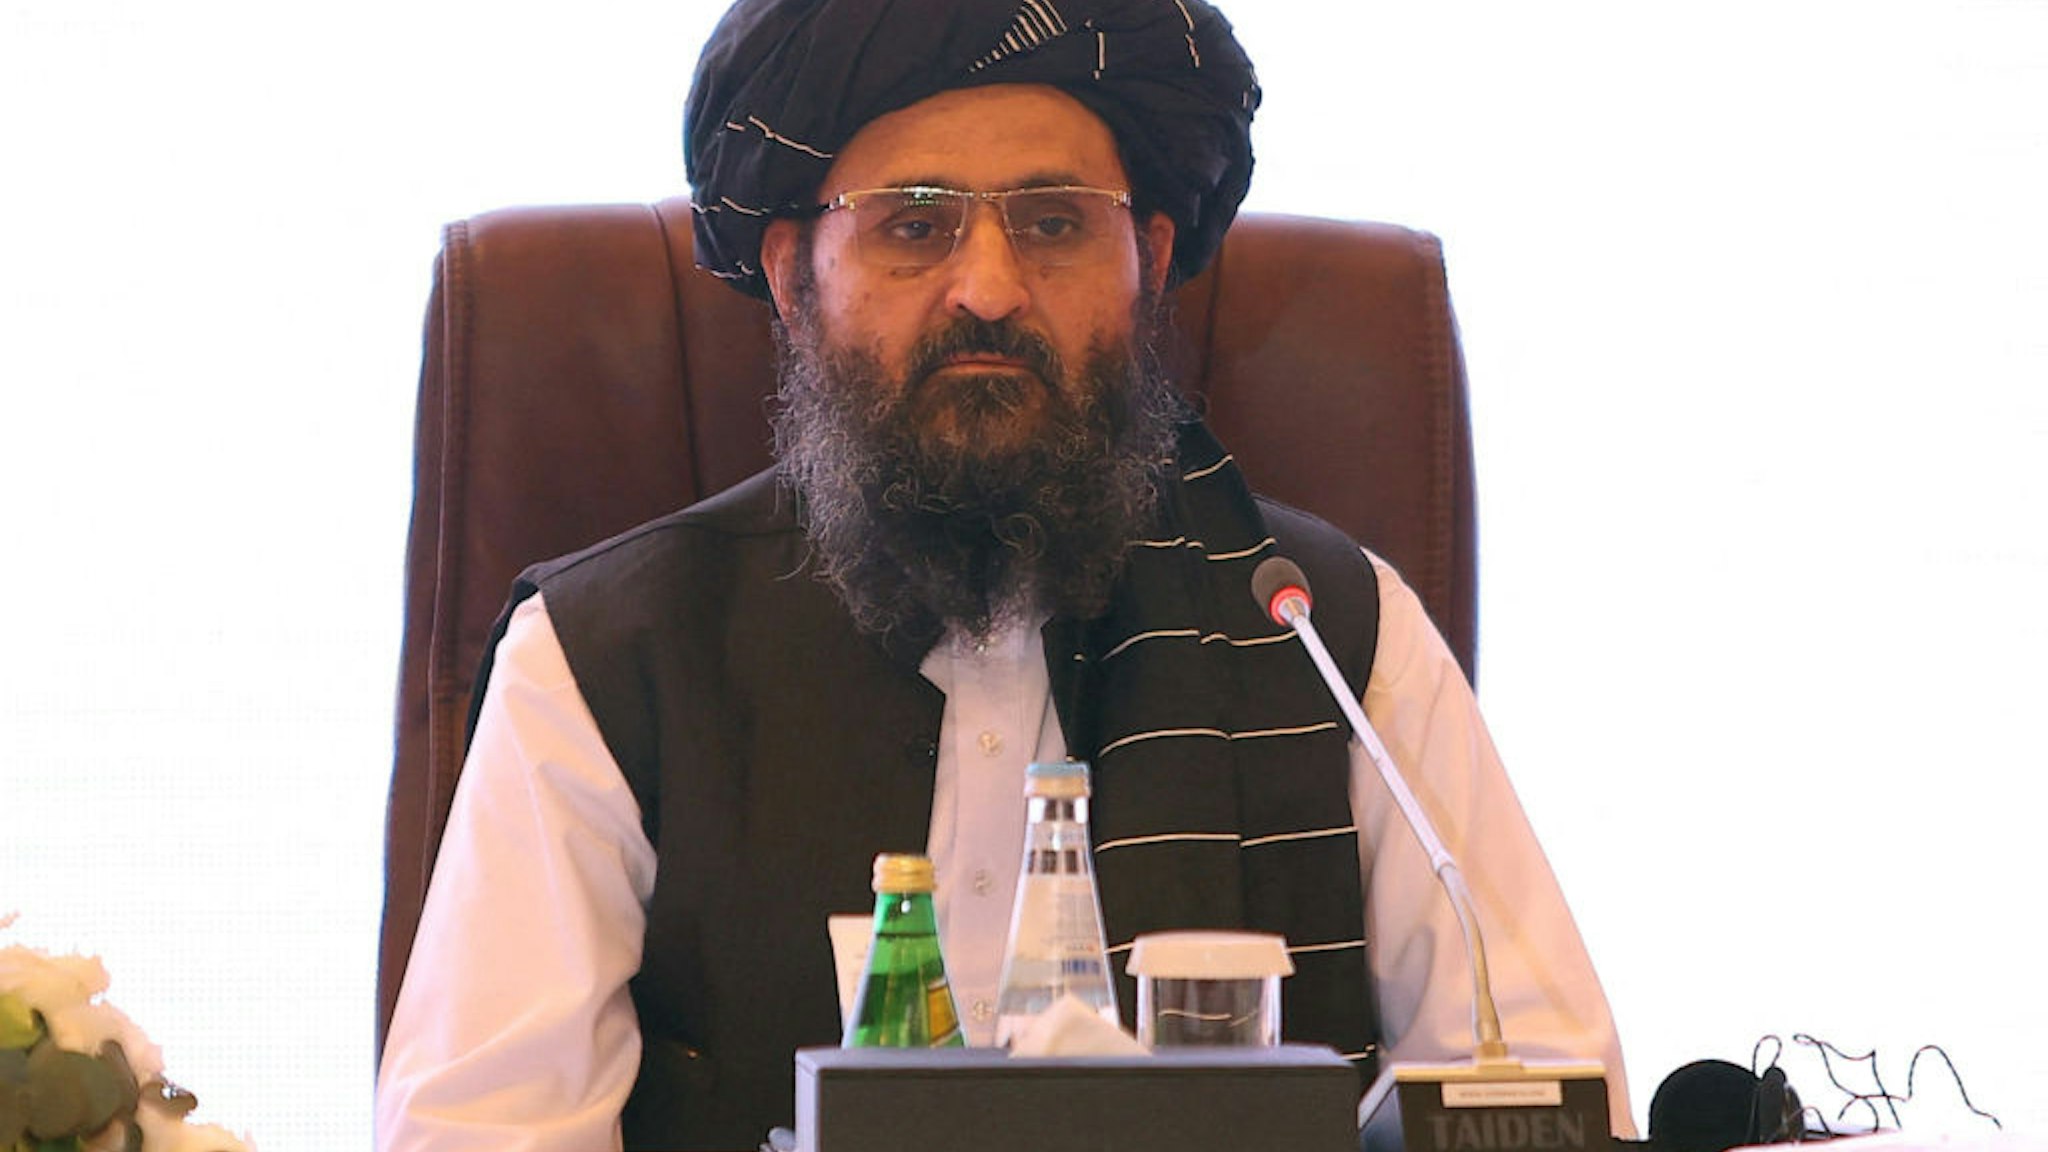 The leader of the Taliban negotiating team Mullah Abdul Ghani Baradar looks on during the final declaration of the peace talks between the Afghan government and the Taliban is presented in Qatar's capital Doha on July 18, 2021. - Representatives of the Afghan government and Taliban insurgents held talks in Doha as violence raged in their country with foreign forces almost entirely withdrawn. The two sides have been meeting on and off for months in the Qatari capital, but the talks have lost momentum as the insurgents made battlefield gains. (Photo by KARIM JAAFAR / AFP) (Photo by KARIM JAAFAR/AFP via Getty Images)